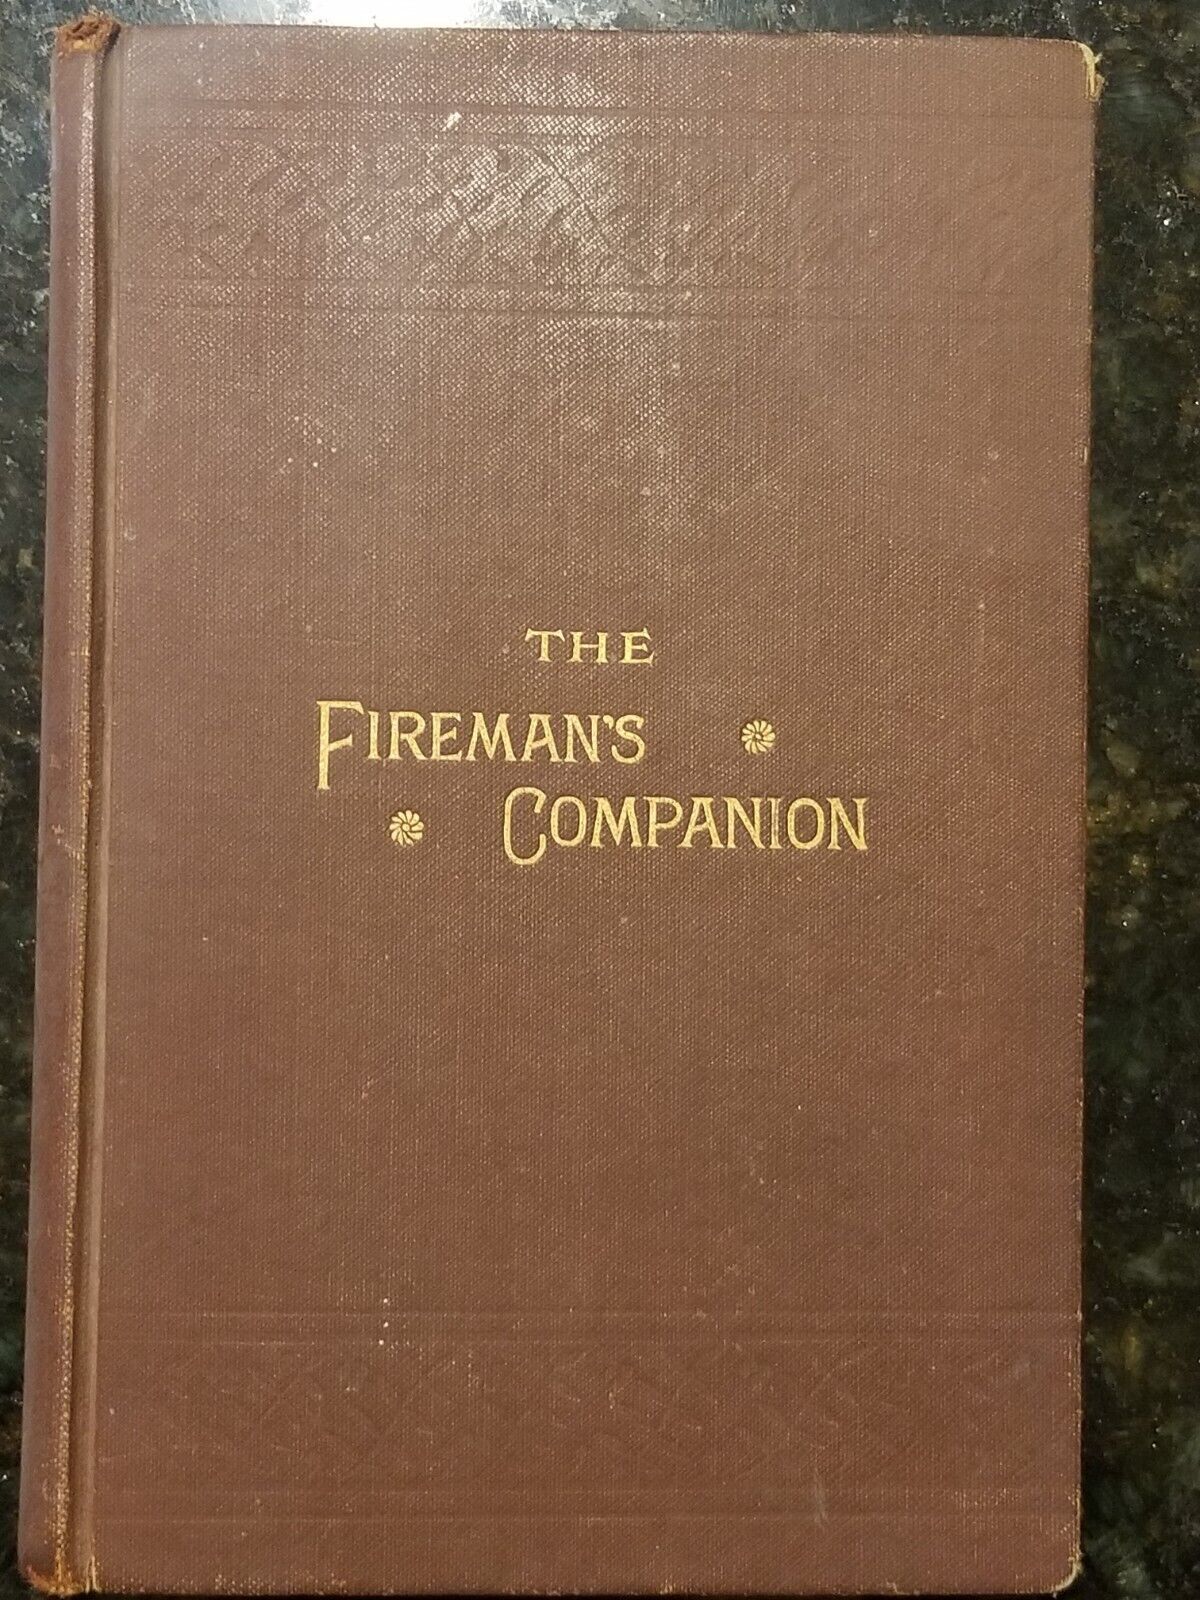 1882 The Fireman's Companion and Officers' Hand Book by CAIRNS FIREMAN EQUIPMENT